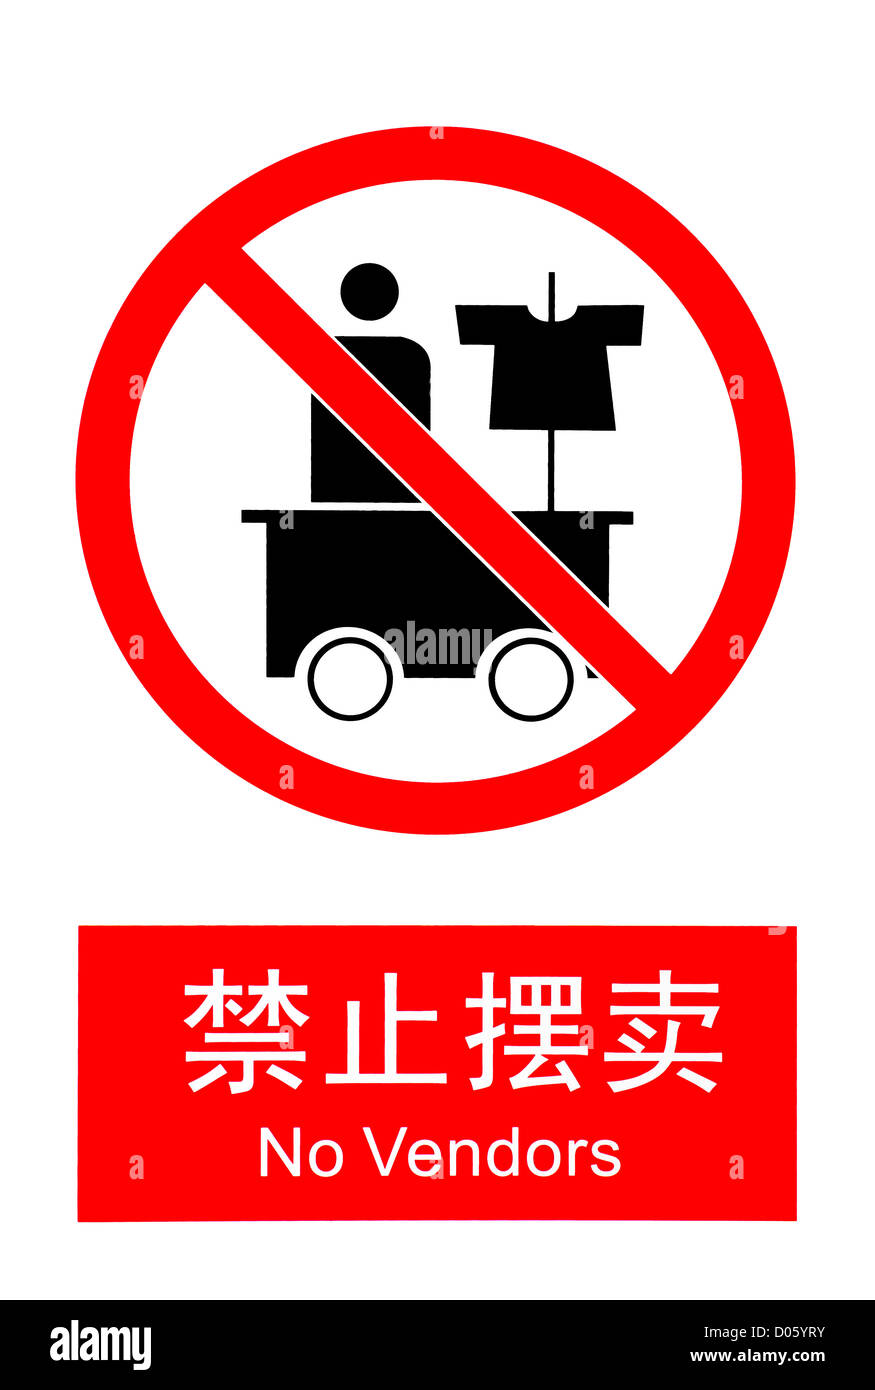 No vendors allowed sign with English and Chinese caption Stock Photo